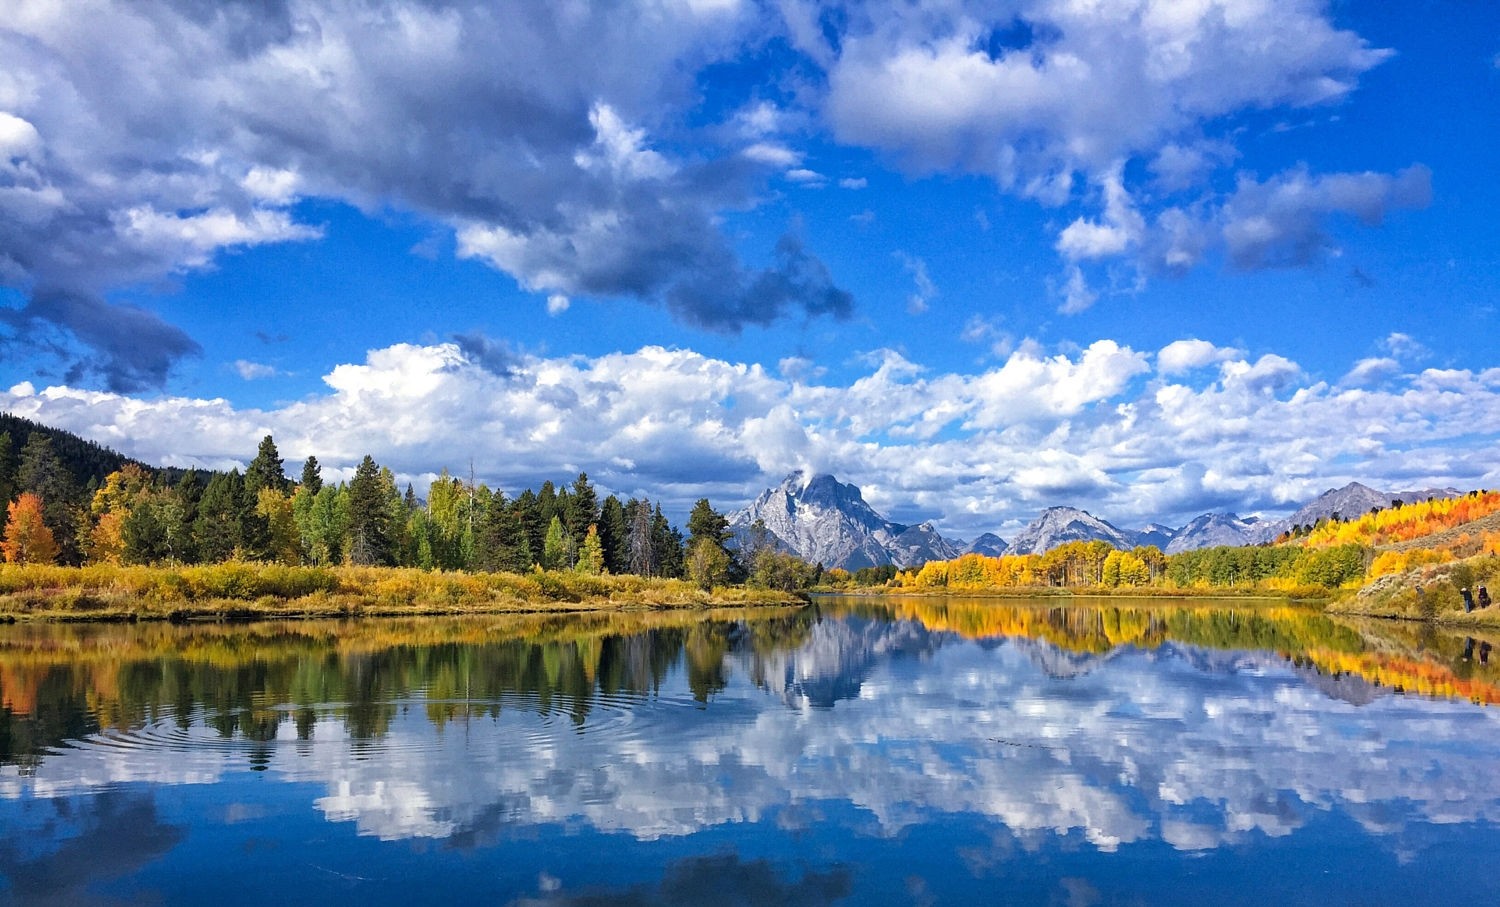 photography, Nature, Landscape, River, Mountains, Forest, Fall, Morning, Clouds, Reflection, Grand Teton National Park, Wyoming Wallpaper